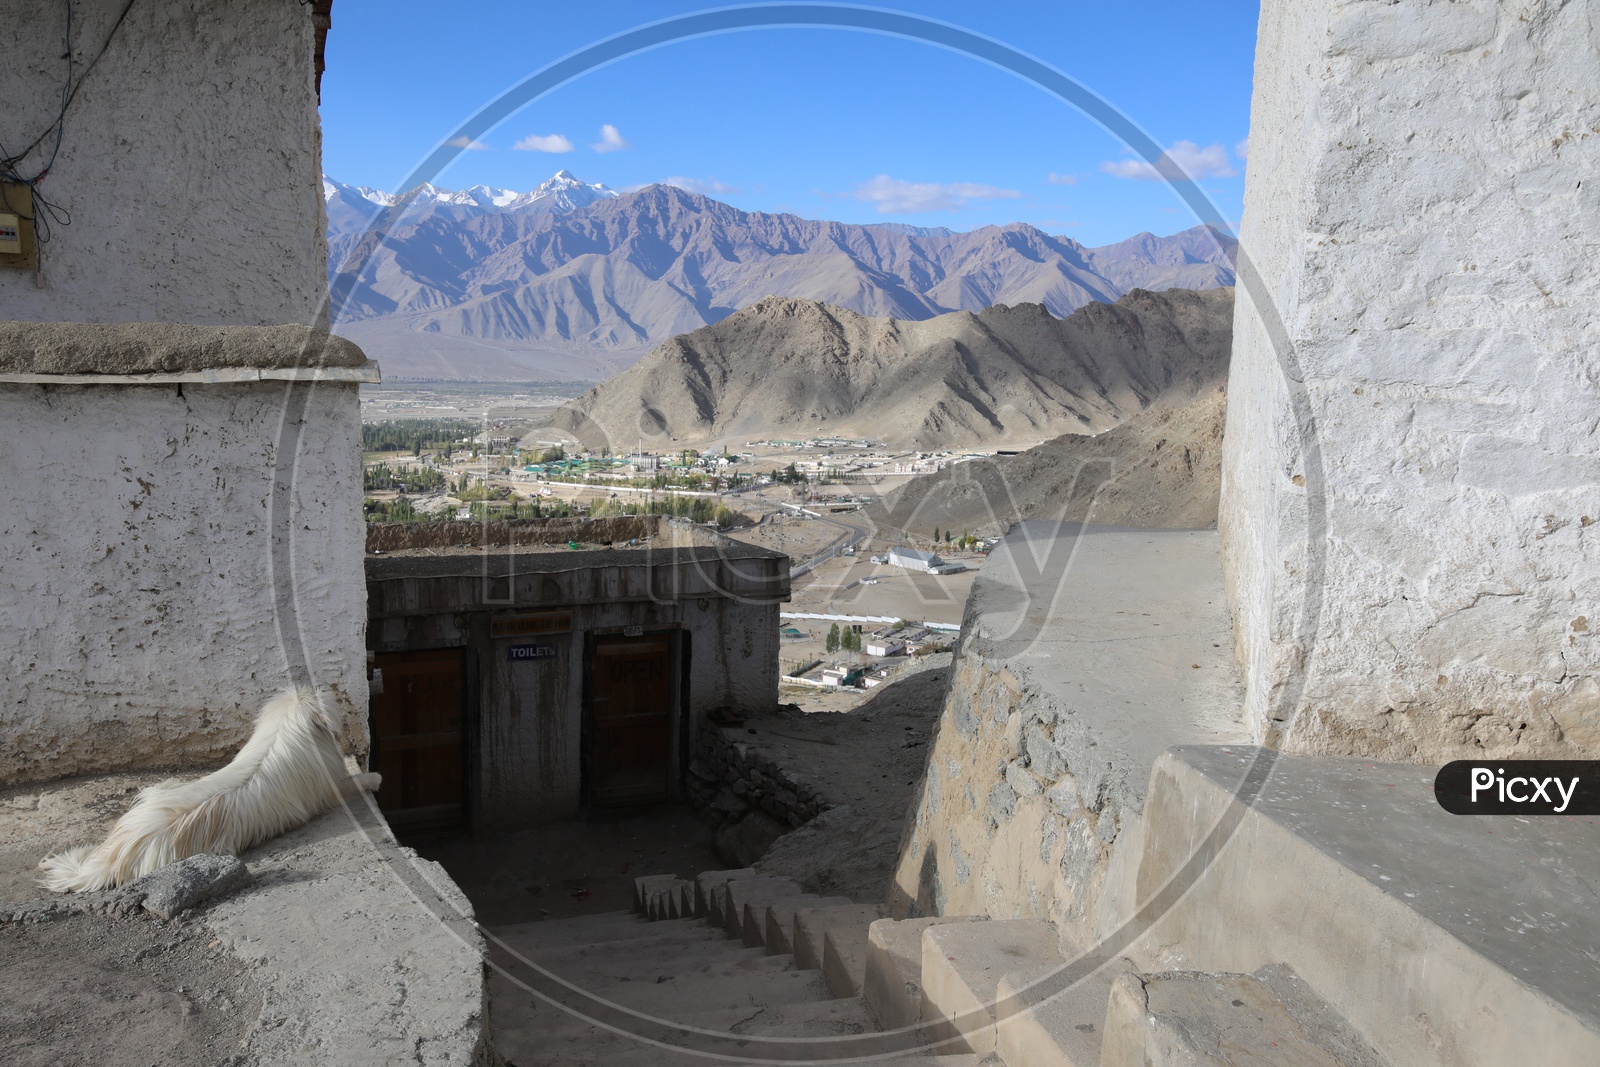 Beautiful Landscape of Snow Capped Mountains of Leh with leh village in the foreground